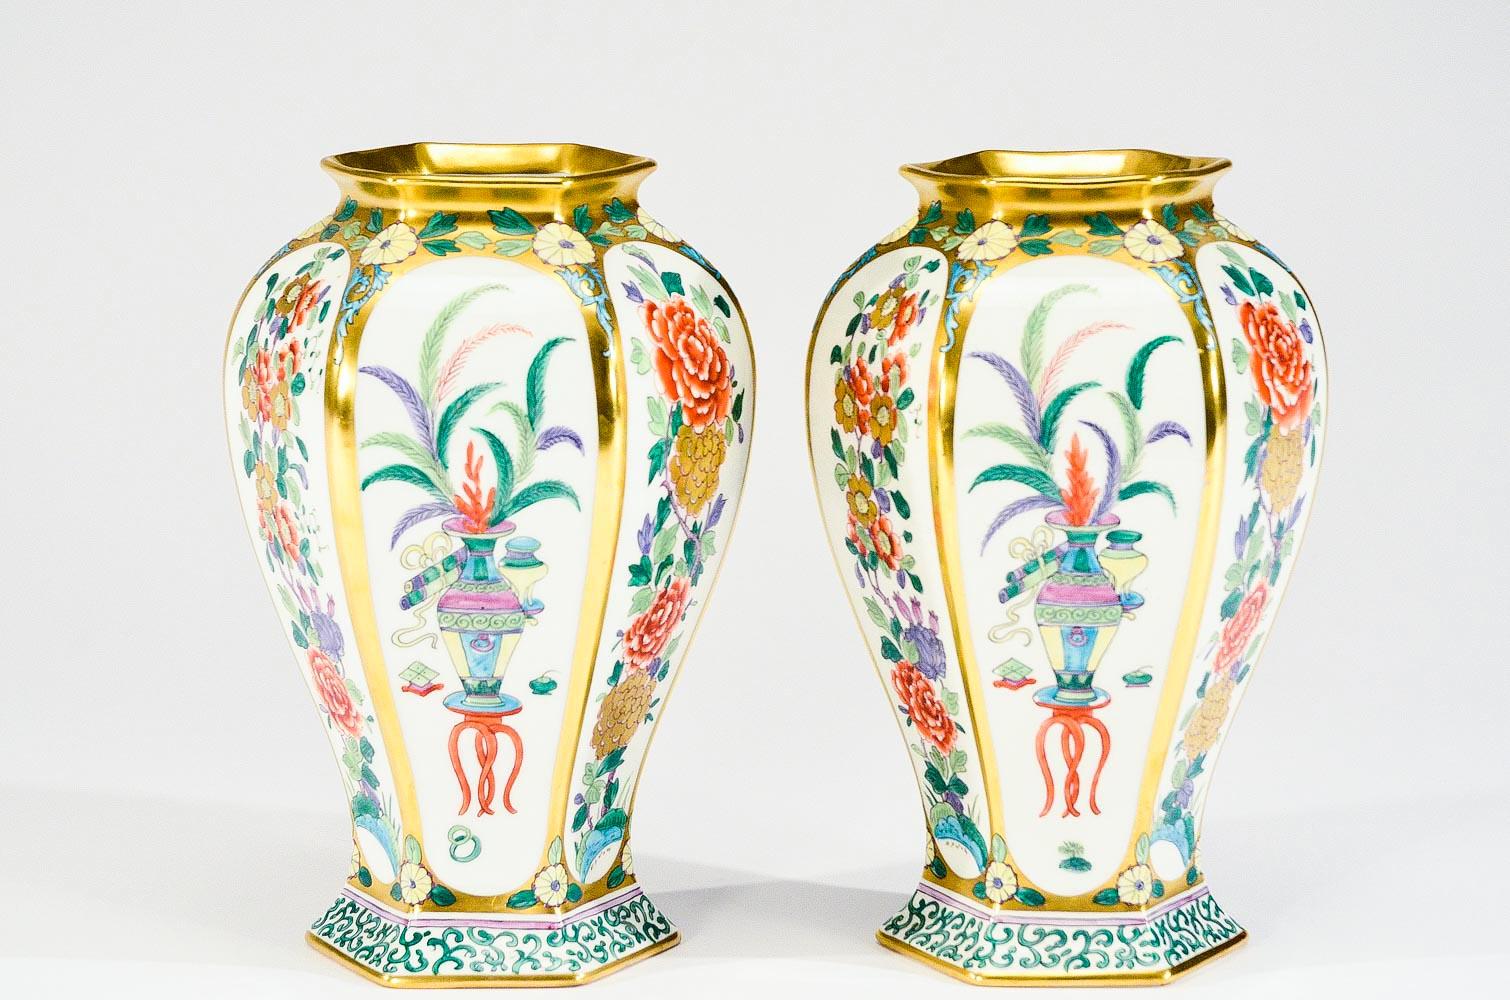 This pair of porcelain vases were custom order and uniquely studio painted as described on the base: 